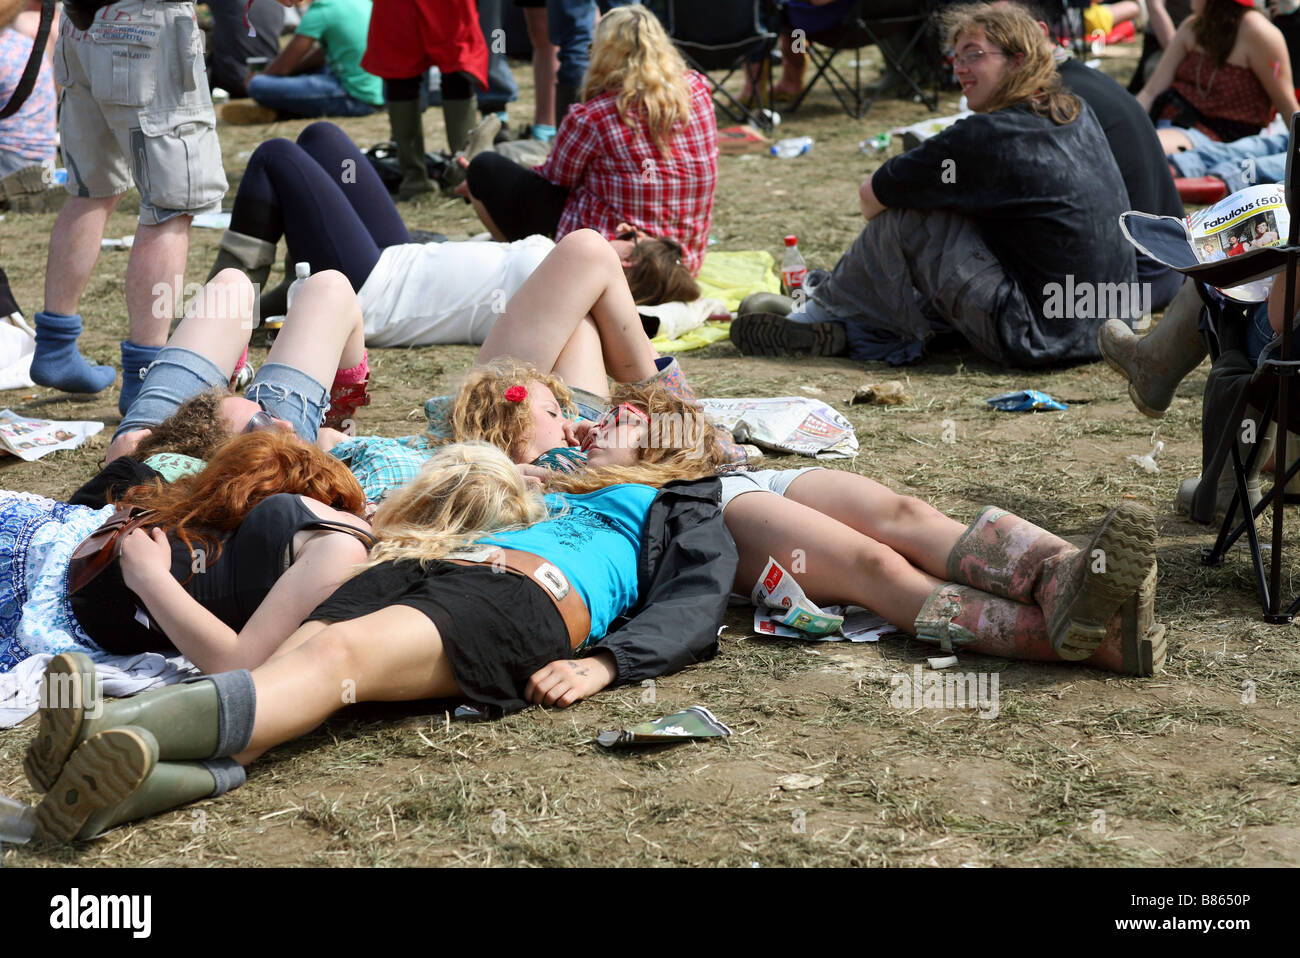 A group of girls lies in the dried mud at the 2008 Glastonbury festival in Pilton, Somerset in the UK. Stock Photo